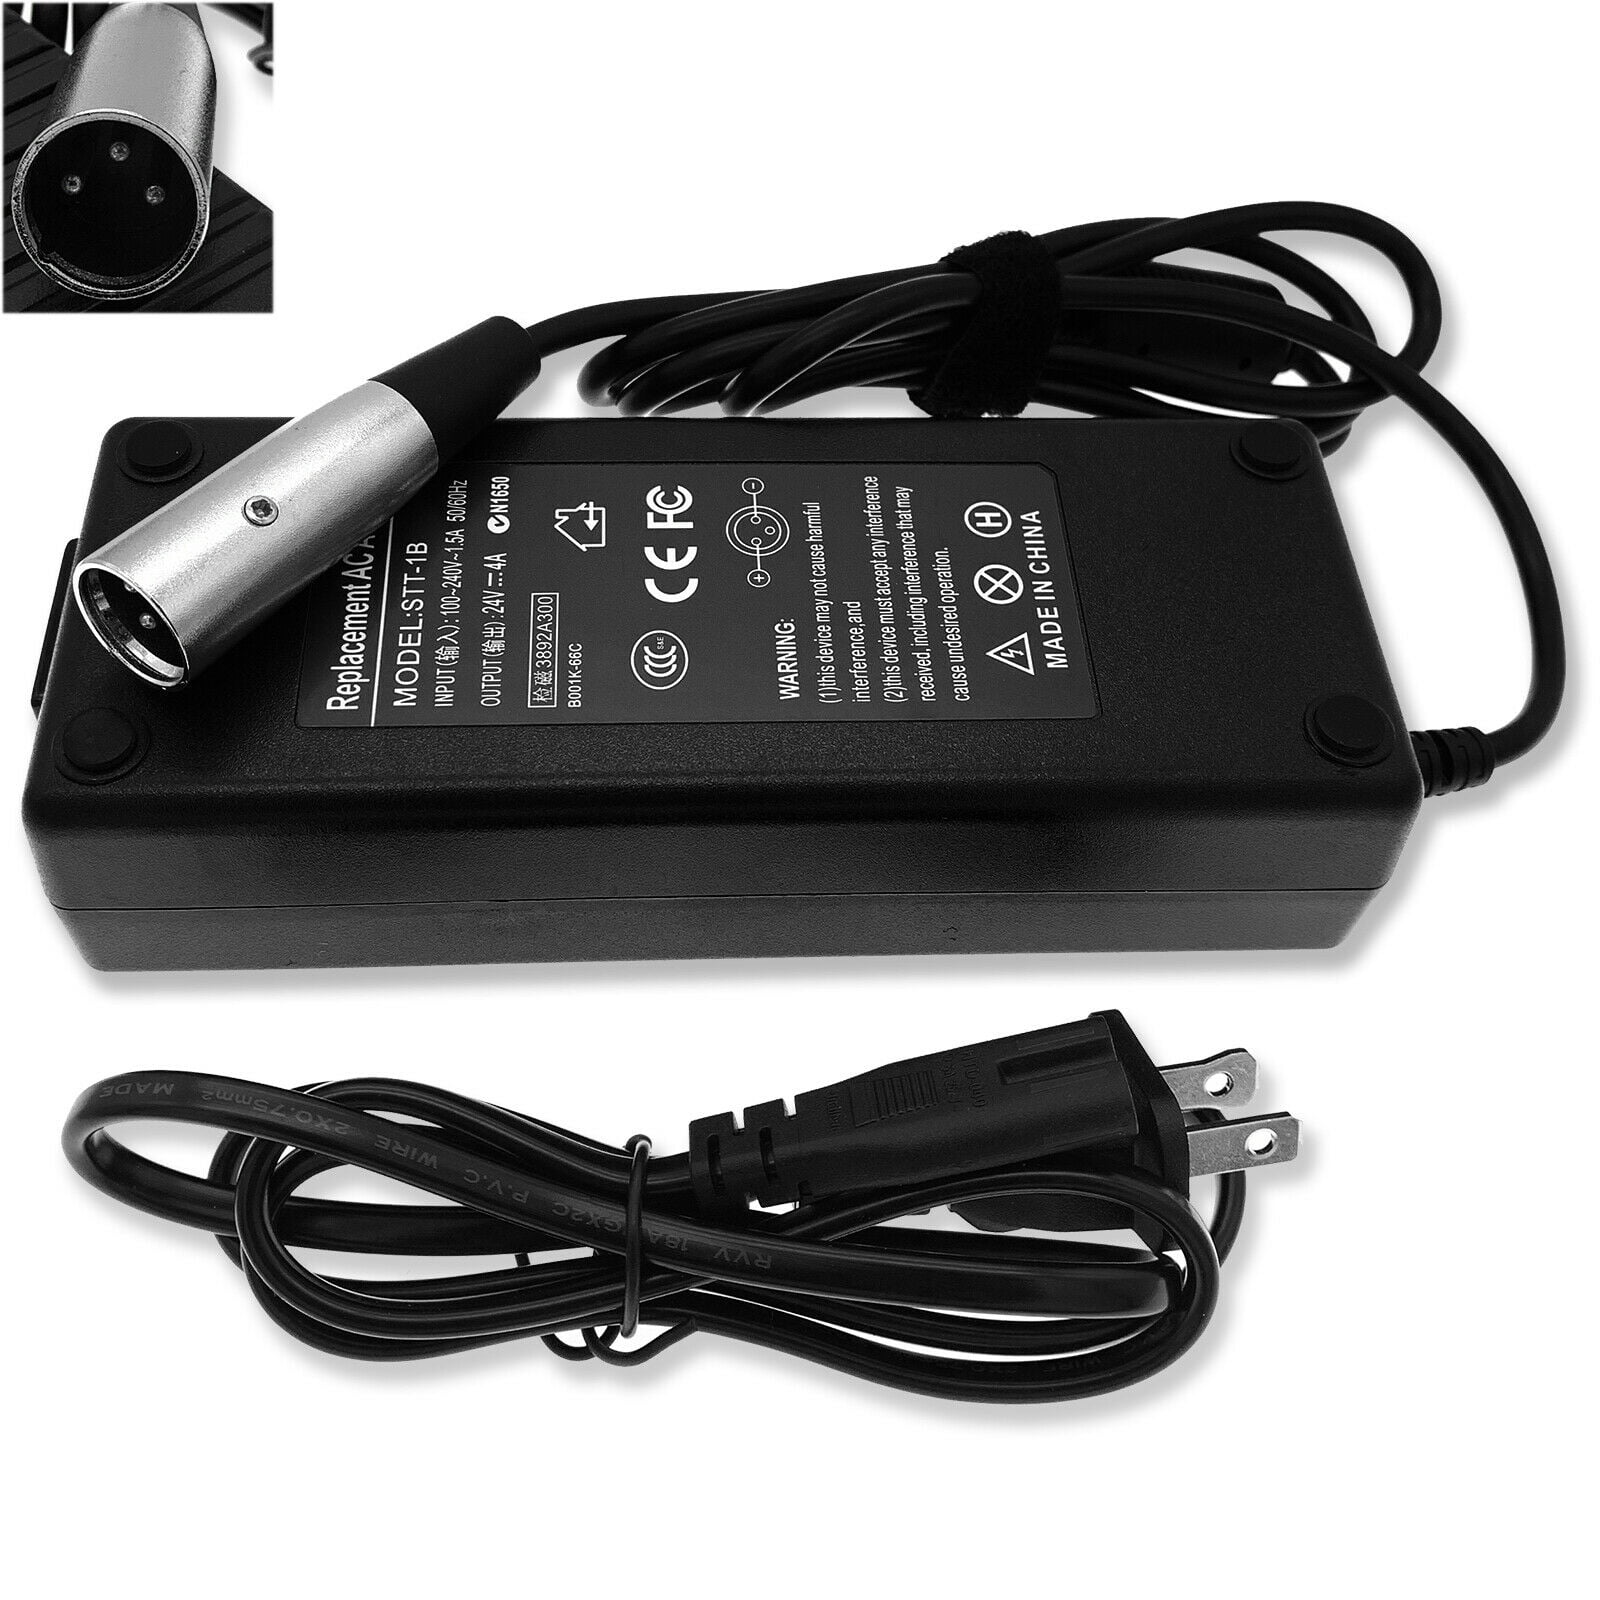 FOR PRIDE GO-GO ELITE TRAVELLER MOBILITY SCOOTER BATTERY CHARGER 24v 2A 48W 